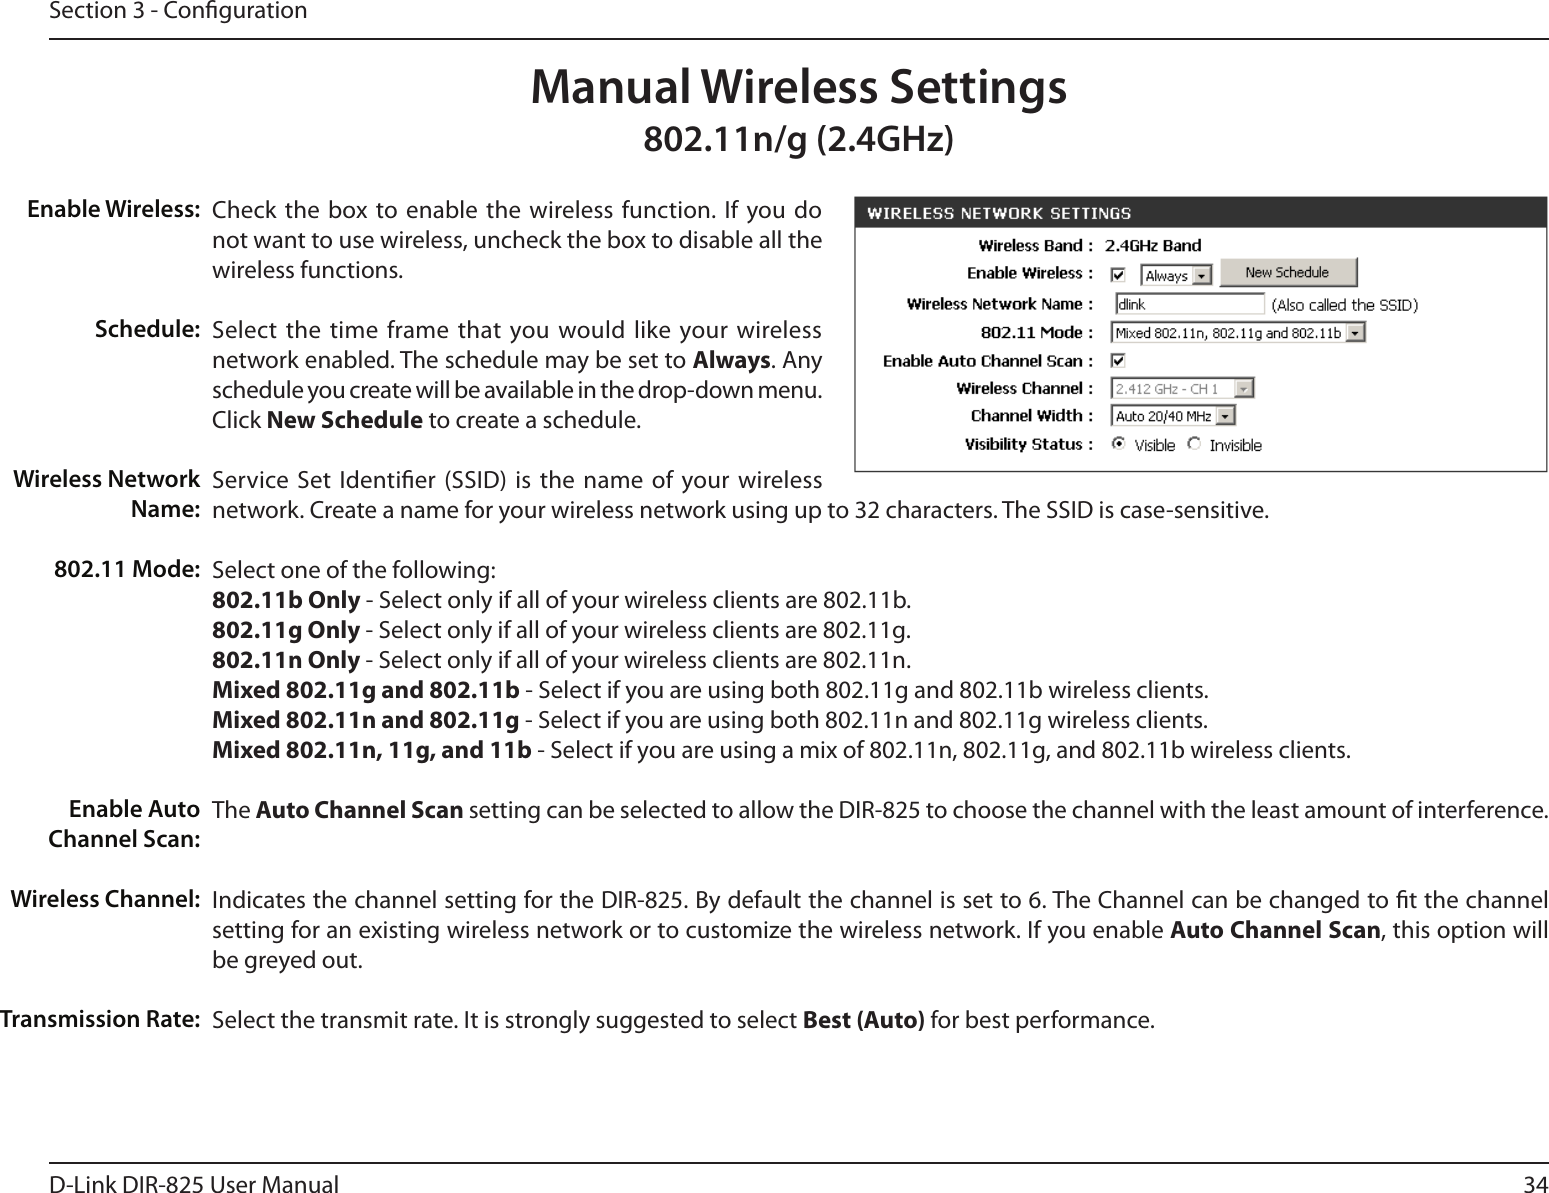 34D-Link DIR-825 User ManualSection 3 - CongurationCheck the  box to enable  the wireless  function.  If  you do not want to use wireless, uncheck the box to disable all the wireless functions.Select  the time frame that you would like  your wireless network enabled. The schedule may be set to Always. Any schedule you create will be available in the drop-down menu. Click New Schedule to create a schedule.Service Set  Identier (SSID) is the  name of  your wireless network. Create a name for your wireless network using up to 32 characters. The SSID is case-sensitive.Select one of the following:802.11b Only - Select only if all of your wireless clients are 802.11b.802.11g Only - Select only if all of your wireless clients are 802.11g.802.11n Only - Select only if all of your wireless clients are 802.11n.Mixed 802.11g and 802.11b - Select if you are using both 802.11g and 802.11b wireless clients.Mixed 802.11n and 802.11g - Select if you are using both 802.11n and 802.11g wireless clients.Mixed 802.11n, 11g, and 11b - Select if you are using a mix of 802.11n, 802.11g, and 802.11b wireless clients.The Auto Channel Scan setting can be selected to allow the DIR-825 to choose the channel with the least amount of interference.Indicates the channel setting for the DIR-825. By default the channel is set to 6. The Channel can be changed to t the channel setting for an existing wireless network or to customize the wireless network. If you enable Auto Channel Scan, this option will be greyed out.Select the transmit rate. It is strongly suggested to select Best (Auto) for best performance.Enable Wireless:Schedule:Wireless Network Name:802.11 Mode:Enable Auto Channel Scan:Wireless Channel:Transmission Rate:Manual Wireless Settings802.11n/g (2.4GHz)